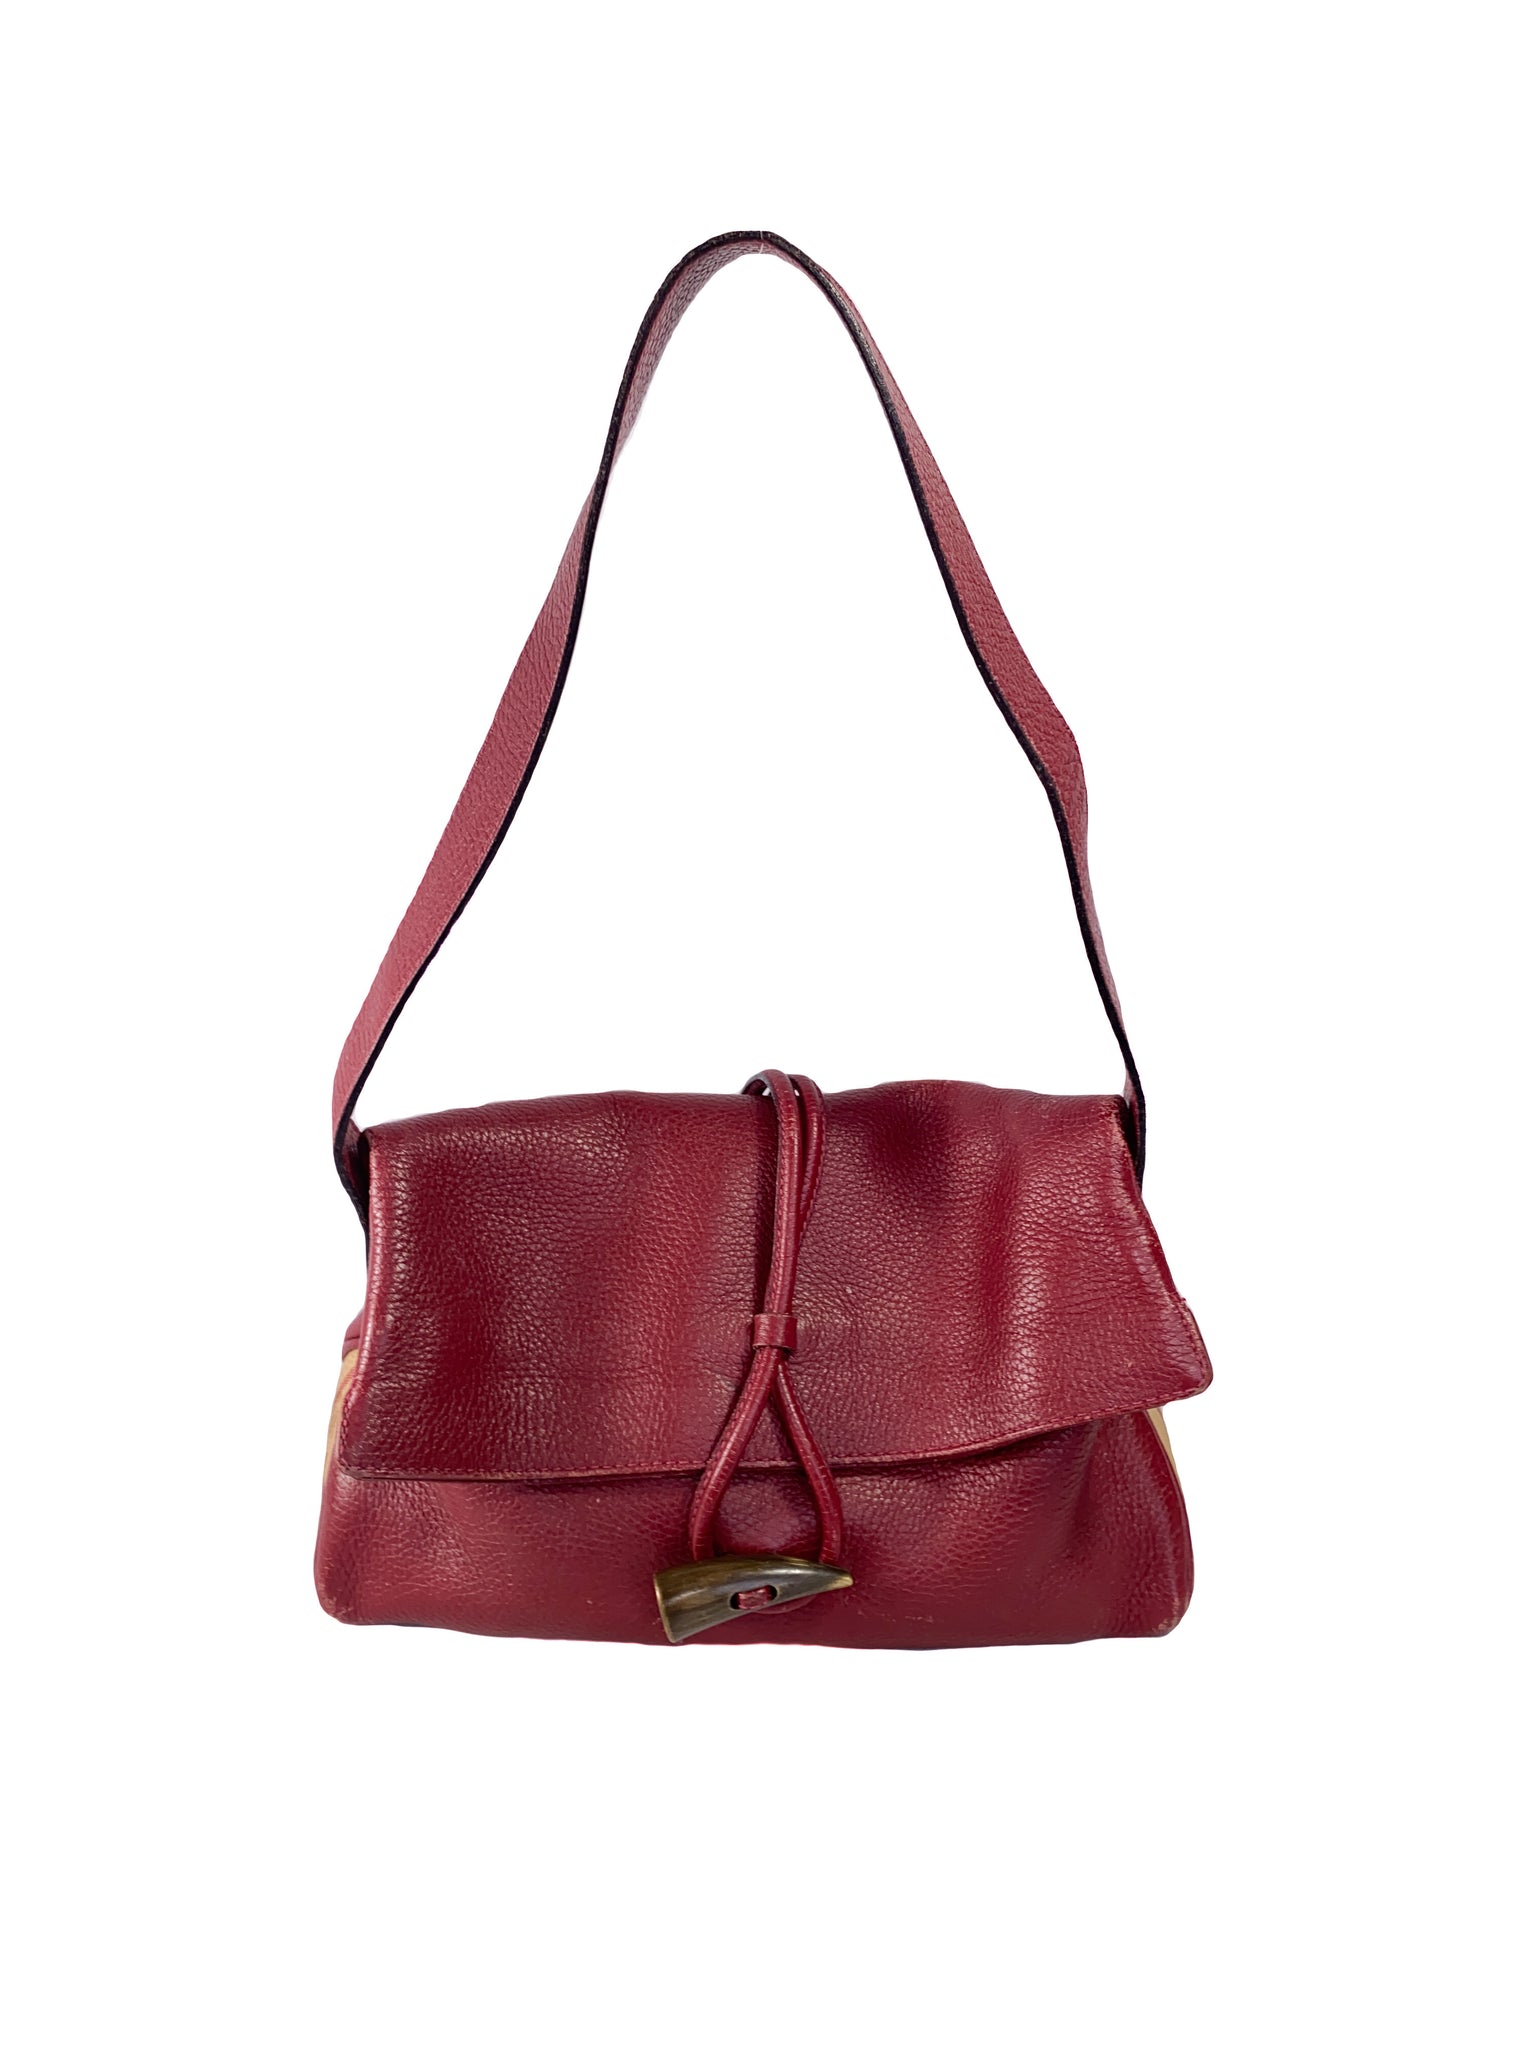 Burberry Red Plaid Purse Discount, SAVE 45% 